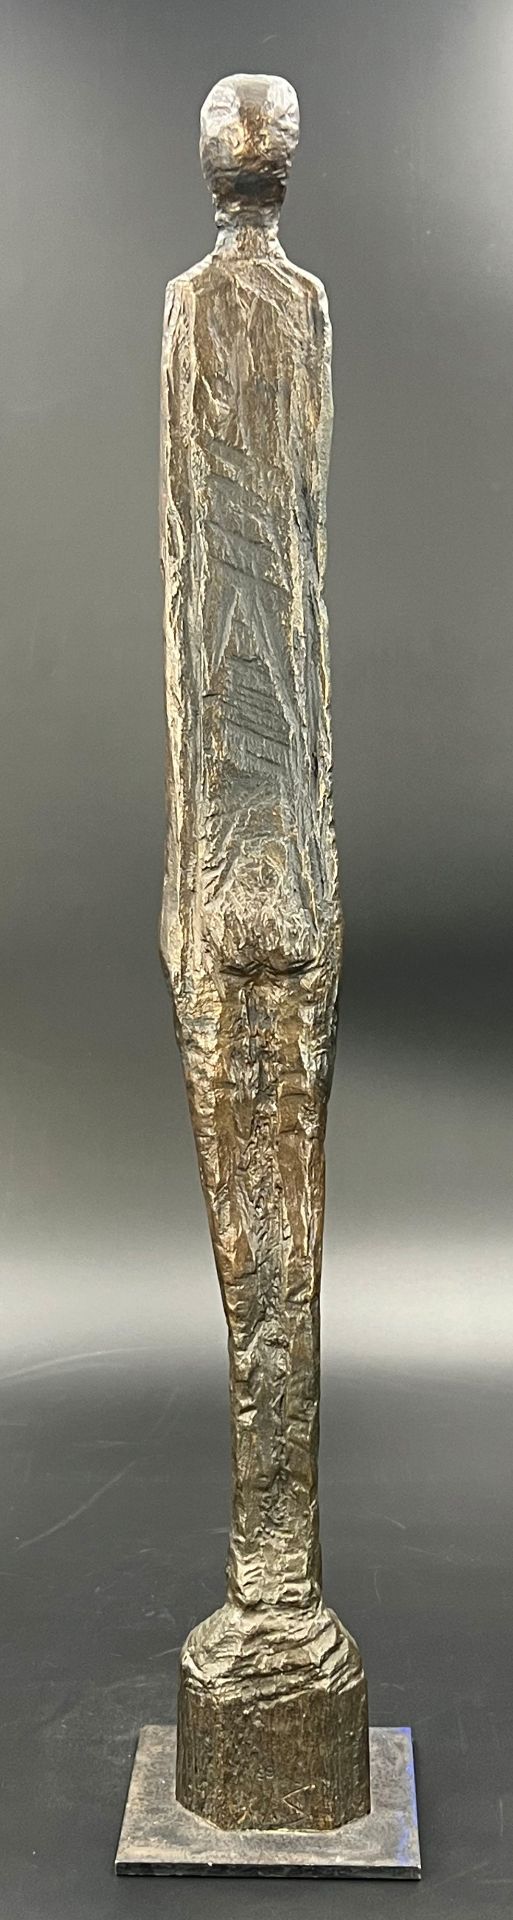 Walter SCHEMBS (1956). Bronze. "Small stele". - Image 4 of 10